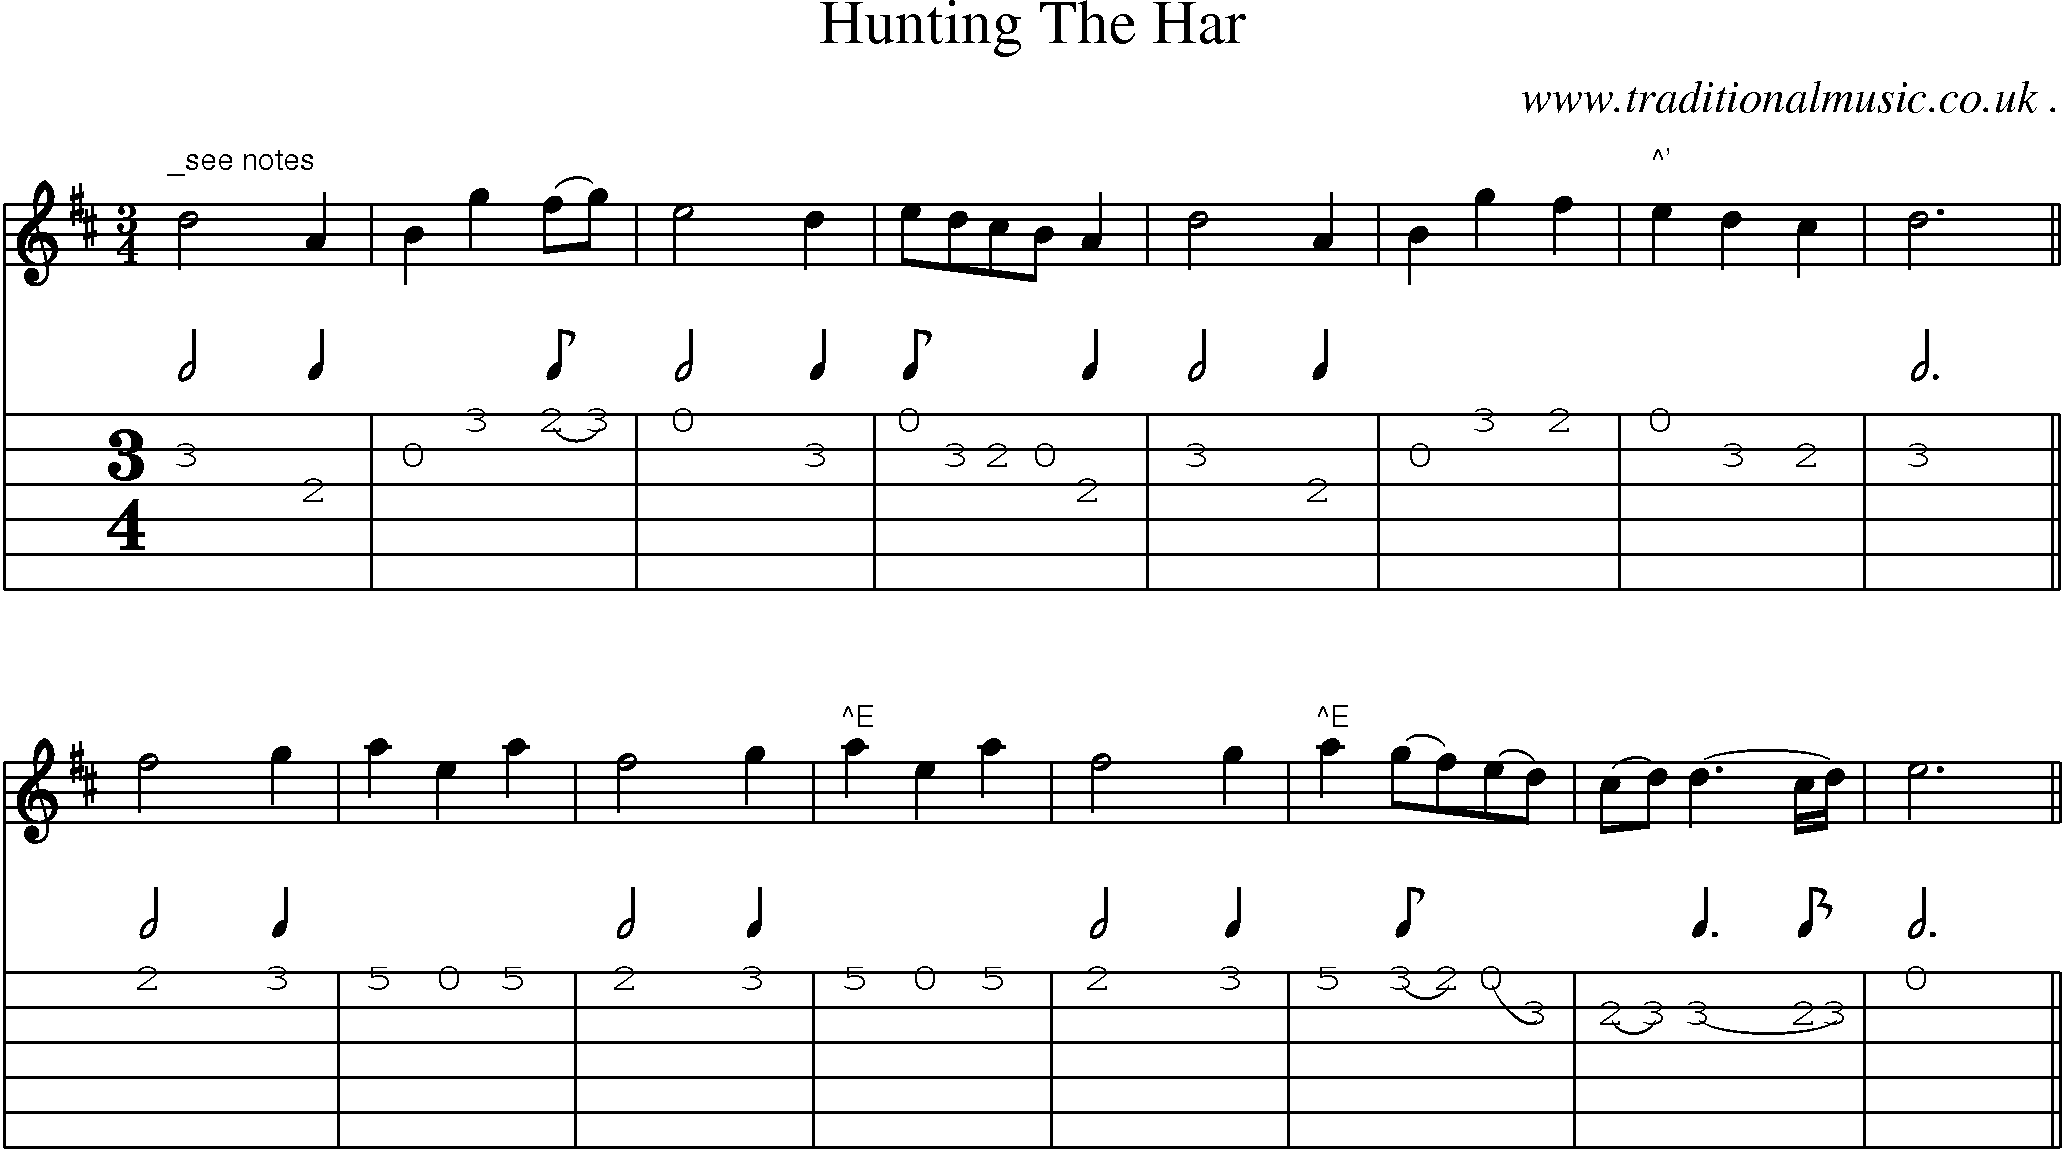 Sheet-Music and Guitar Tabs for Hunting The Har